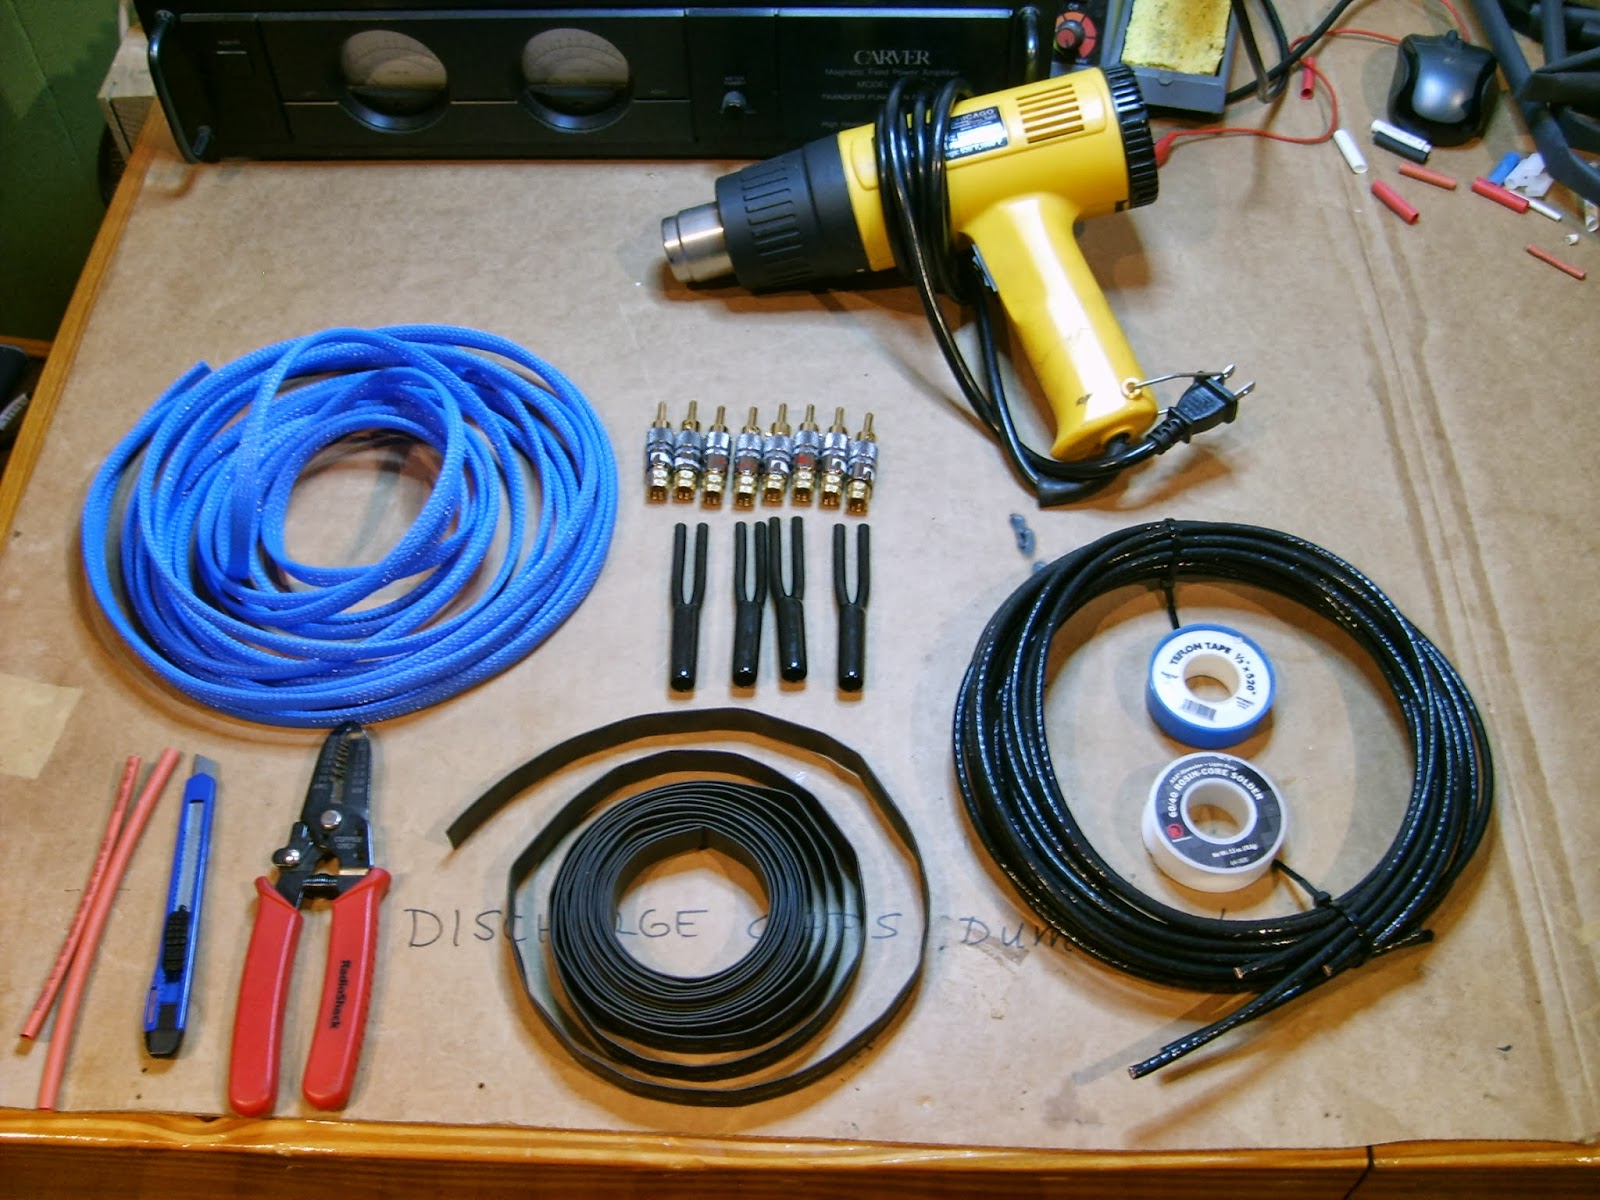 DIY Crossed-Coax Speaker Cables - Home Theater Forum and Systems